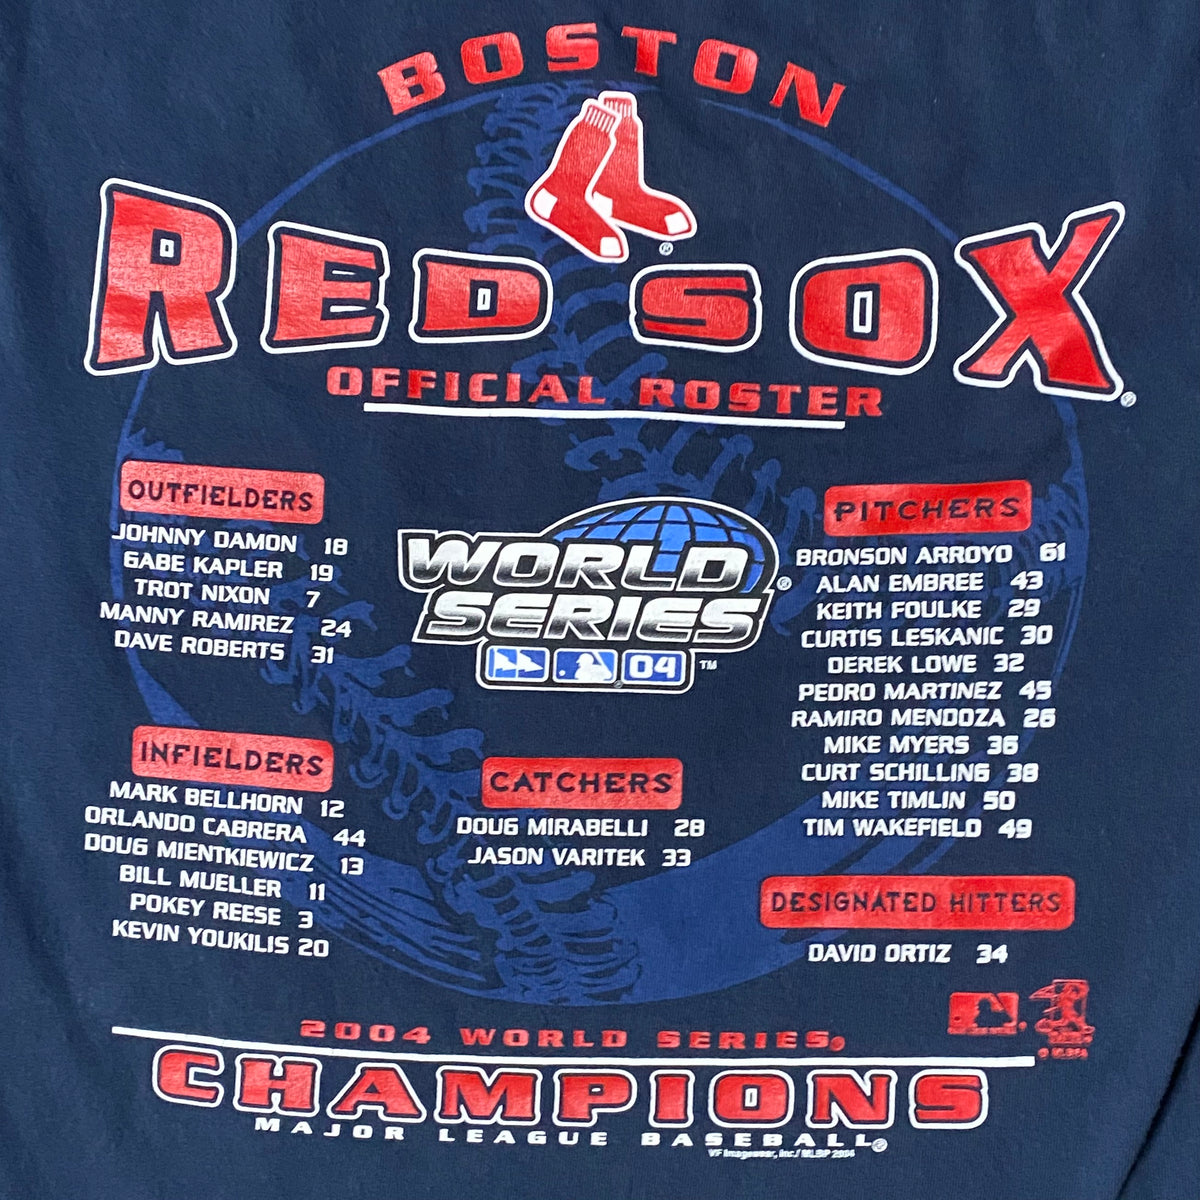 2004 Boston Red Sox World Series T-Shirt Size M – Vintage-Streetwear-Archive